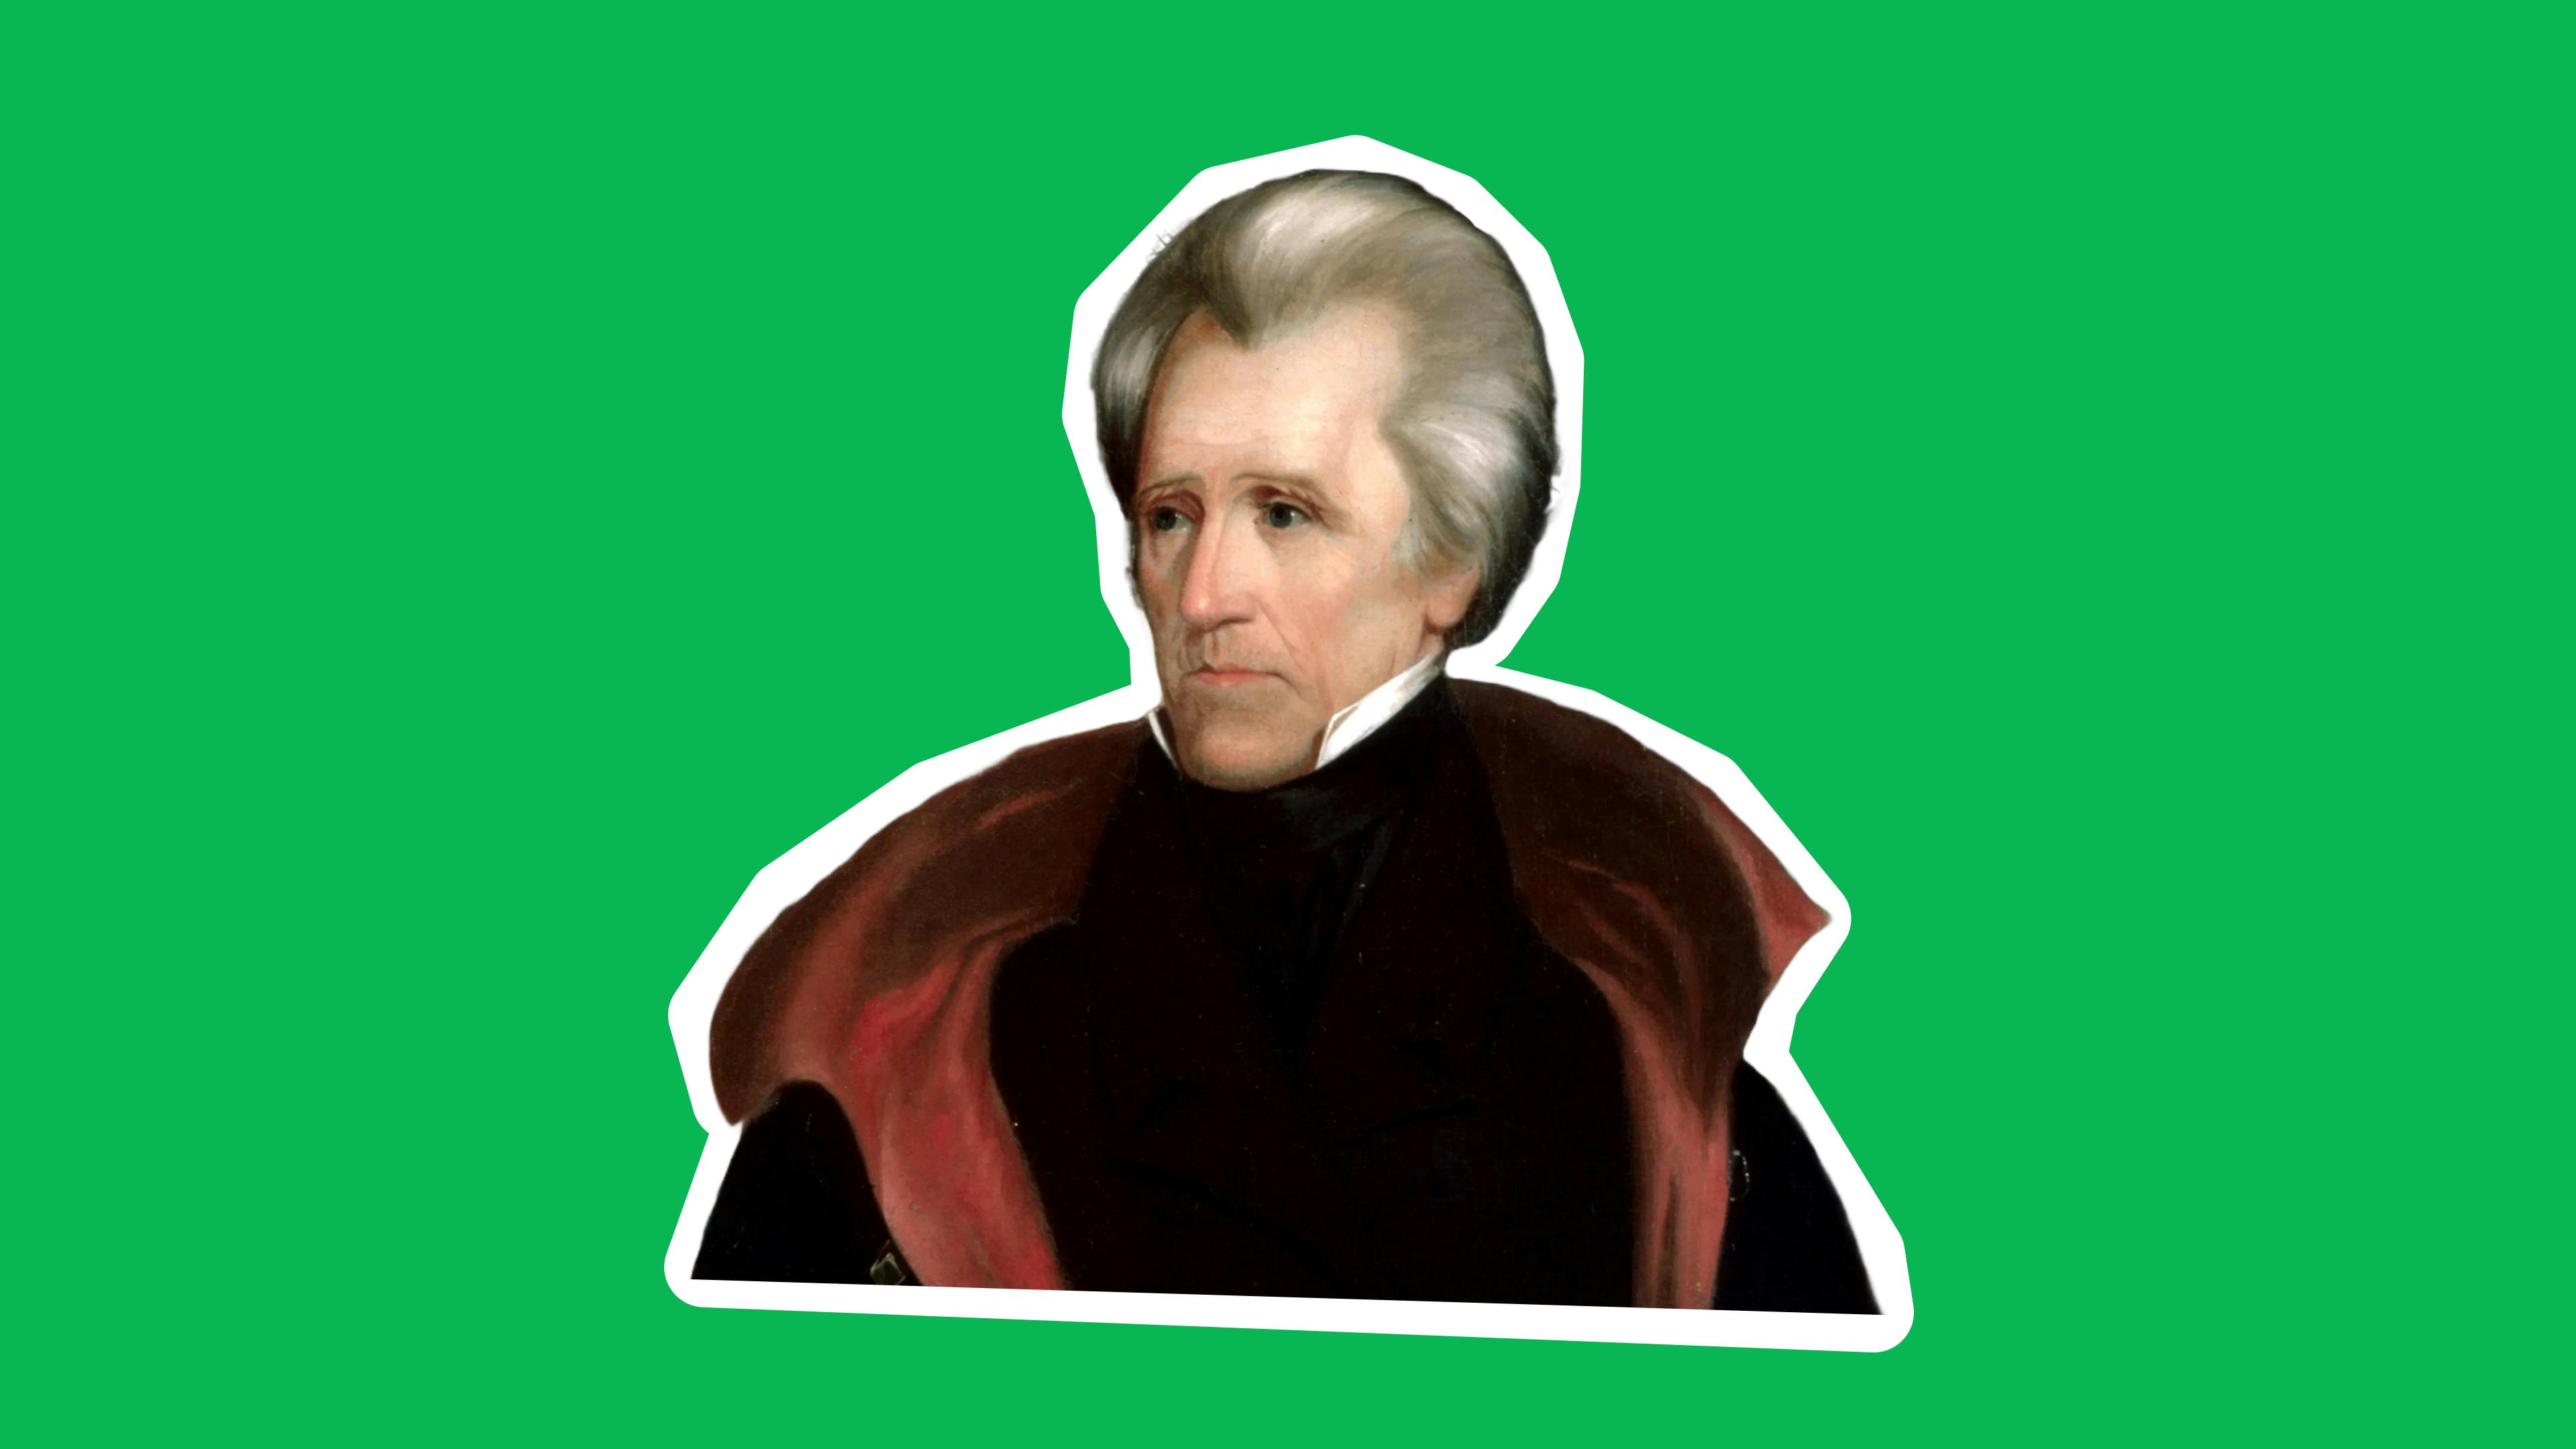 Andrew Jackson in the White House by Jon Meacham